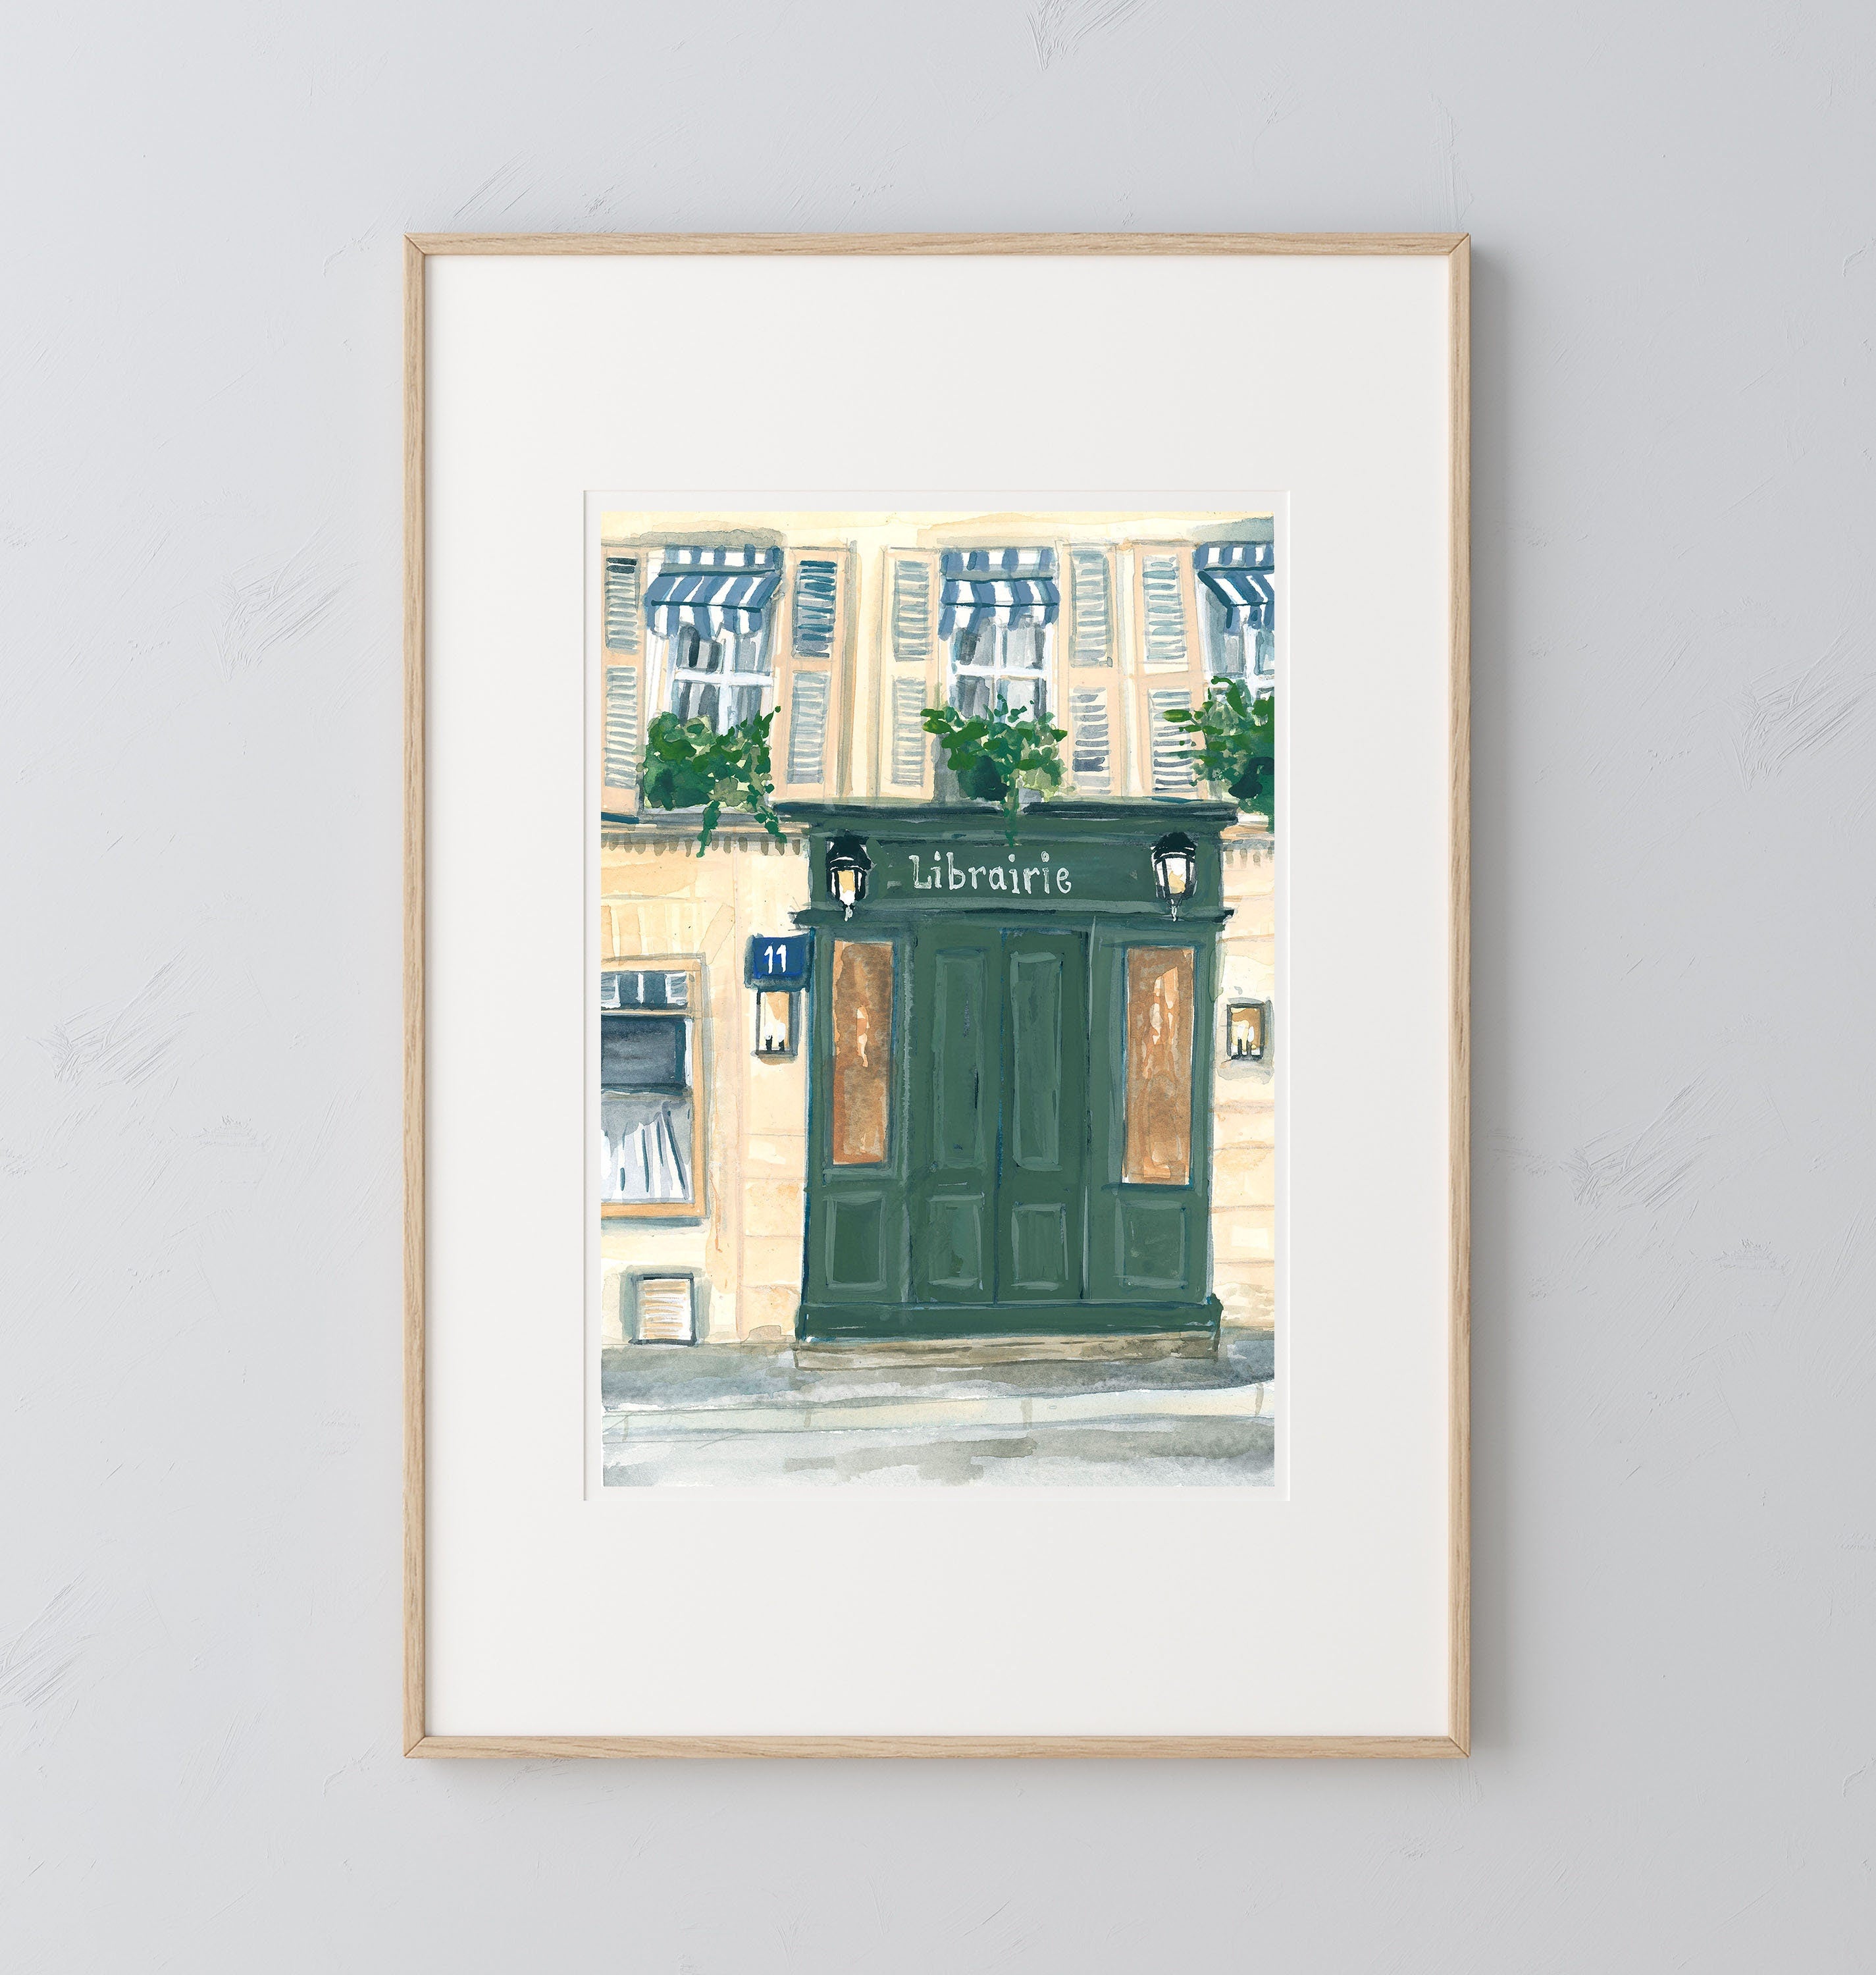 Paris bookstore print of painting by Medjool Studio. Print of original gouache painting of the front doors of a Parisian bookstore.